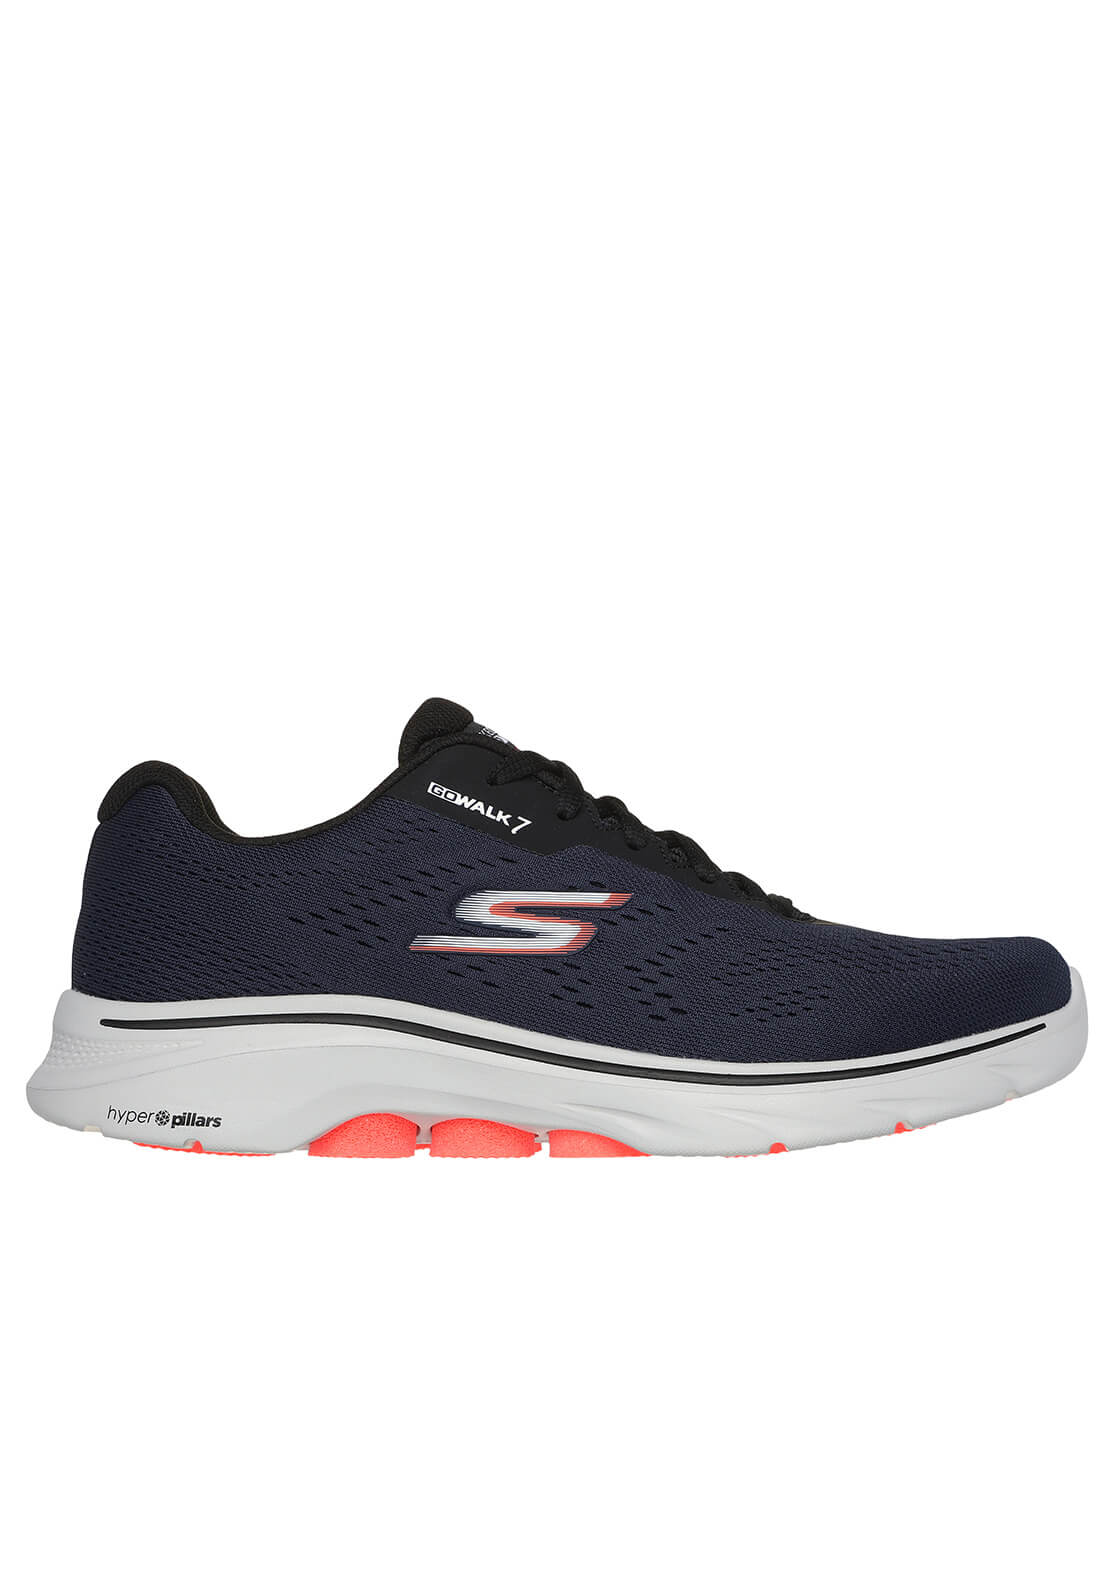 Skechers GO WALK 7™ The Construct - Navy &amp; Black 2 Shaws Department Stores